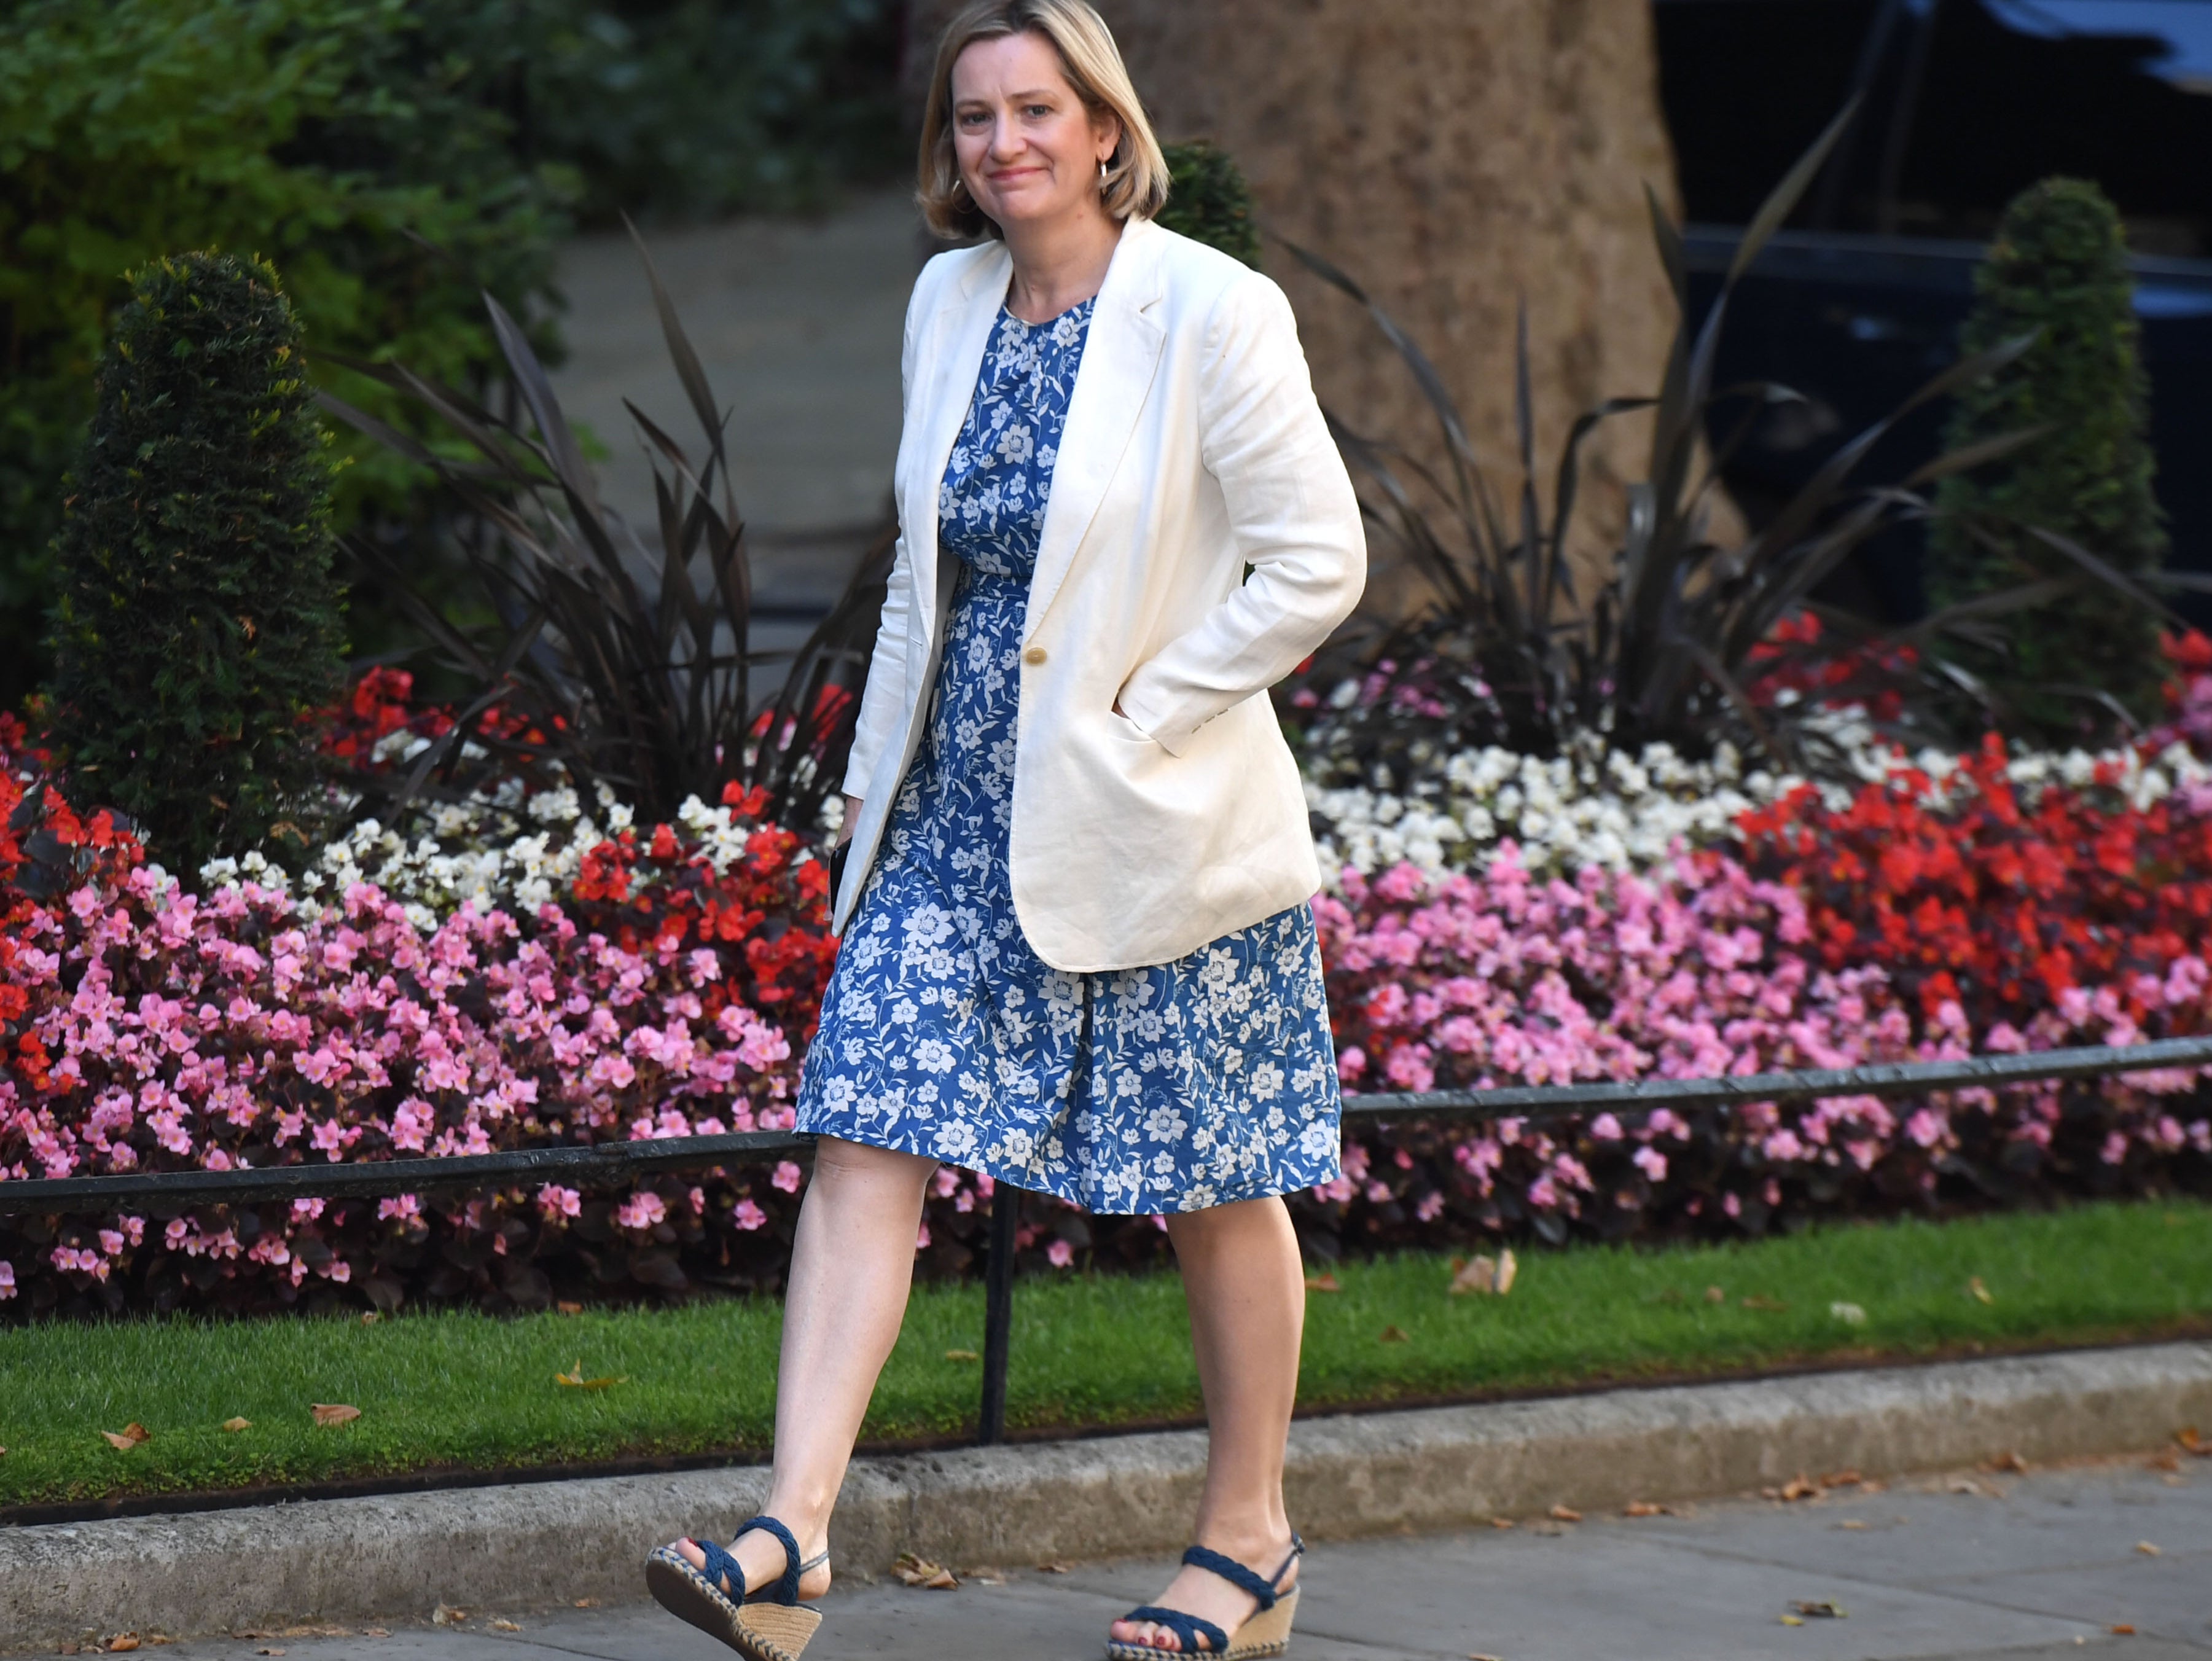 Amber Rudd’s other private-sector roles include senior adviser to cybersecurity firm Darktrace